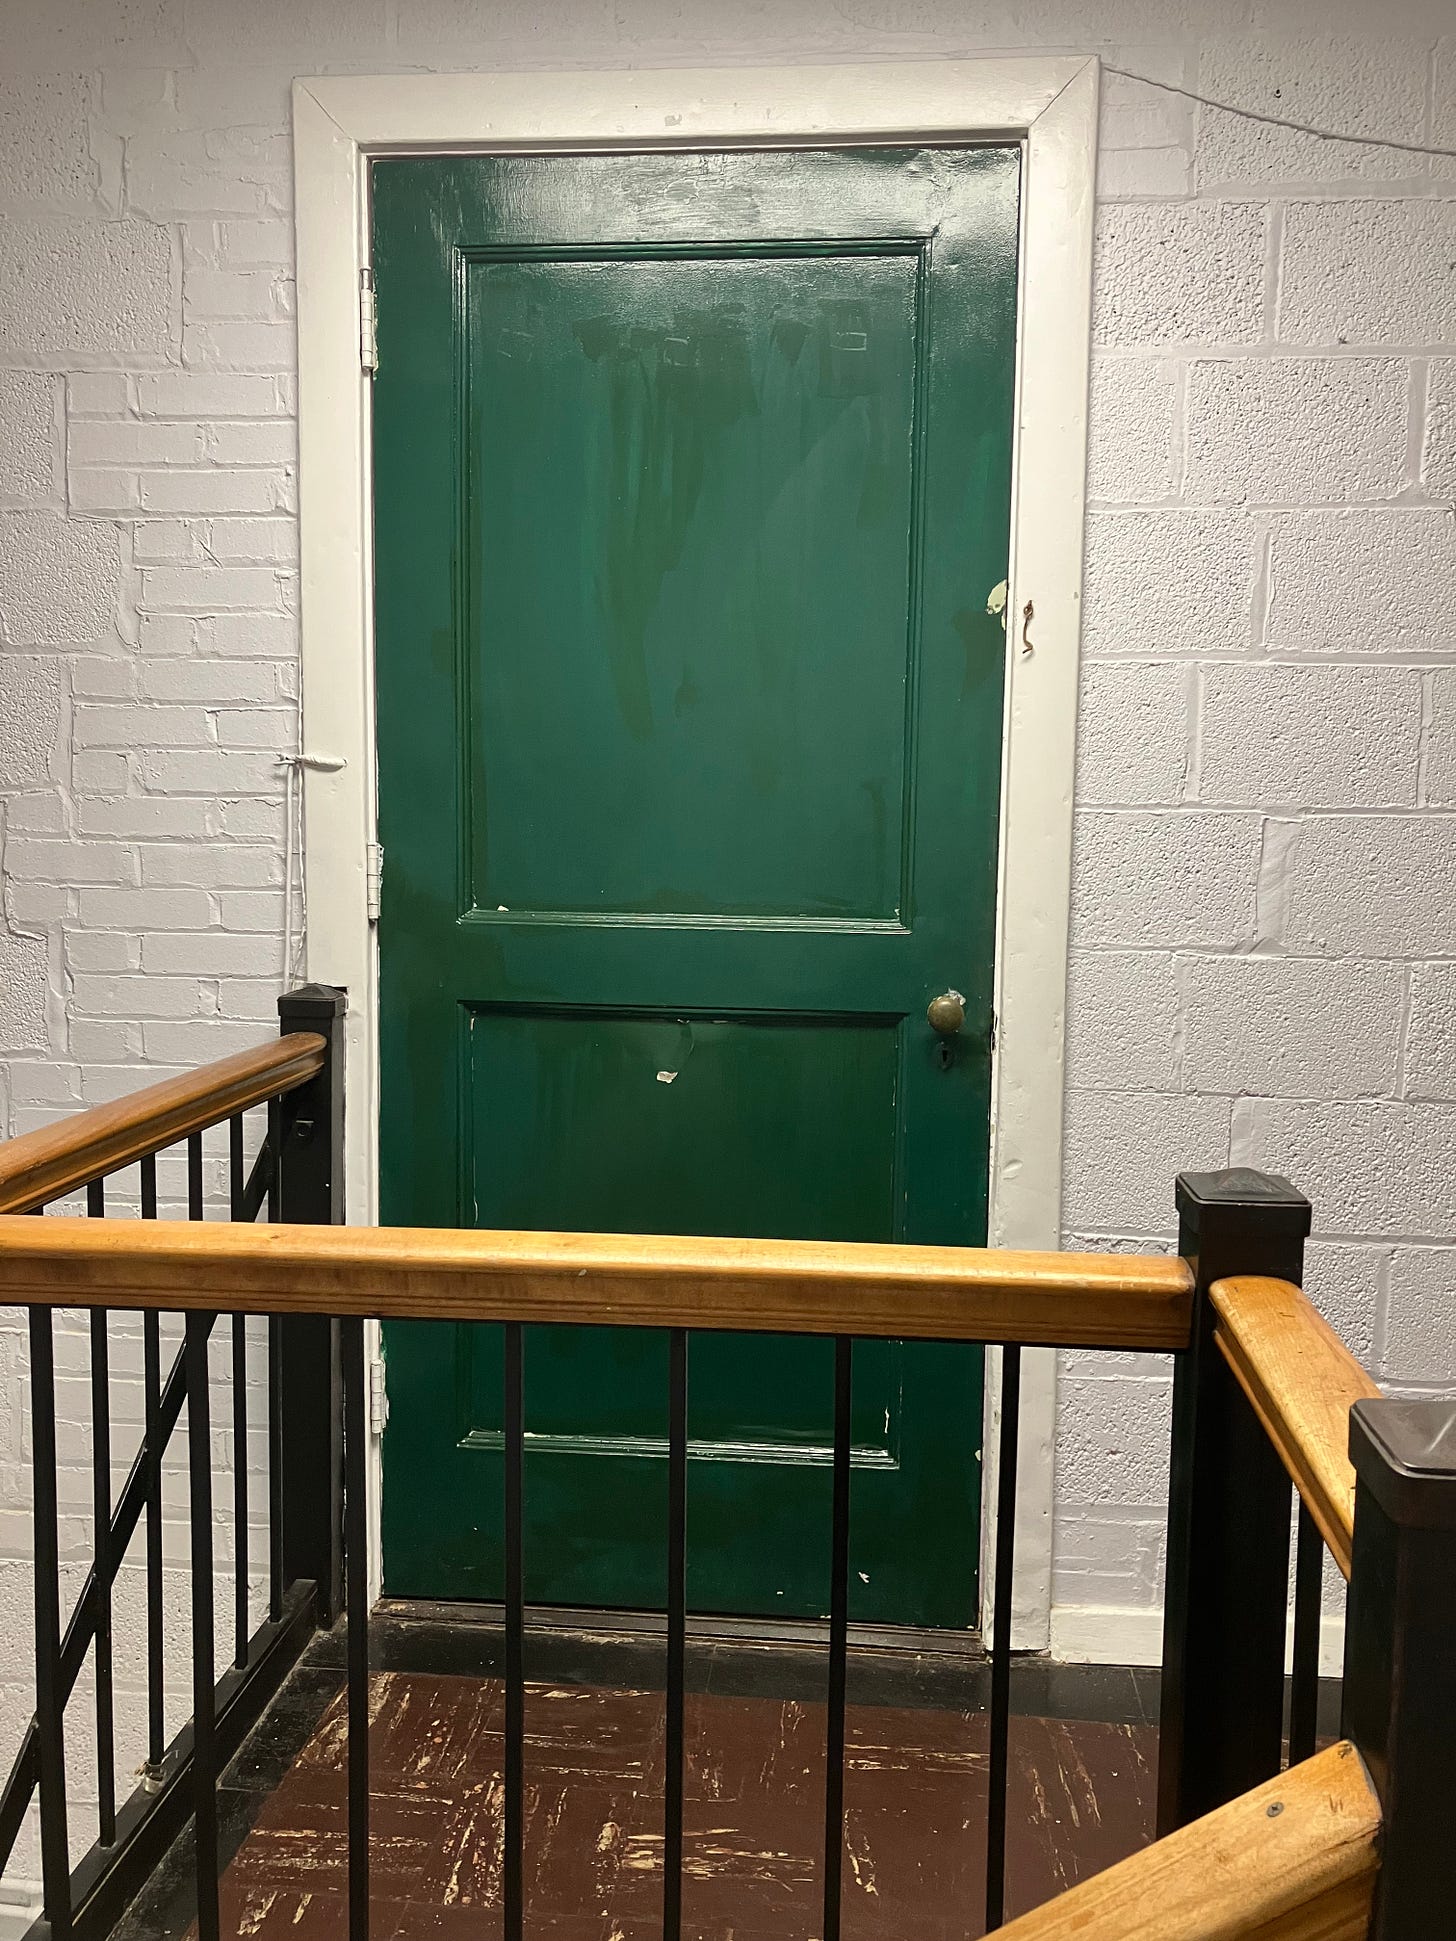 A photograph of a door situated at the top of a staircase inside Flowerbomb's practice space. The door is painted an emerald shade of green.